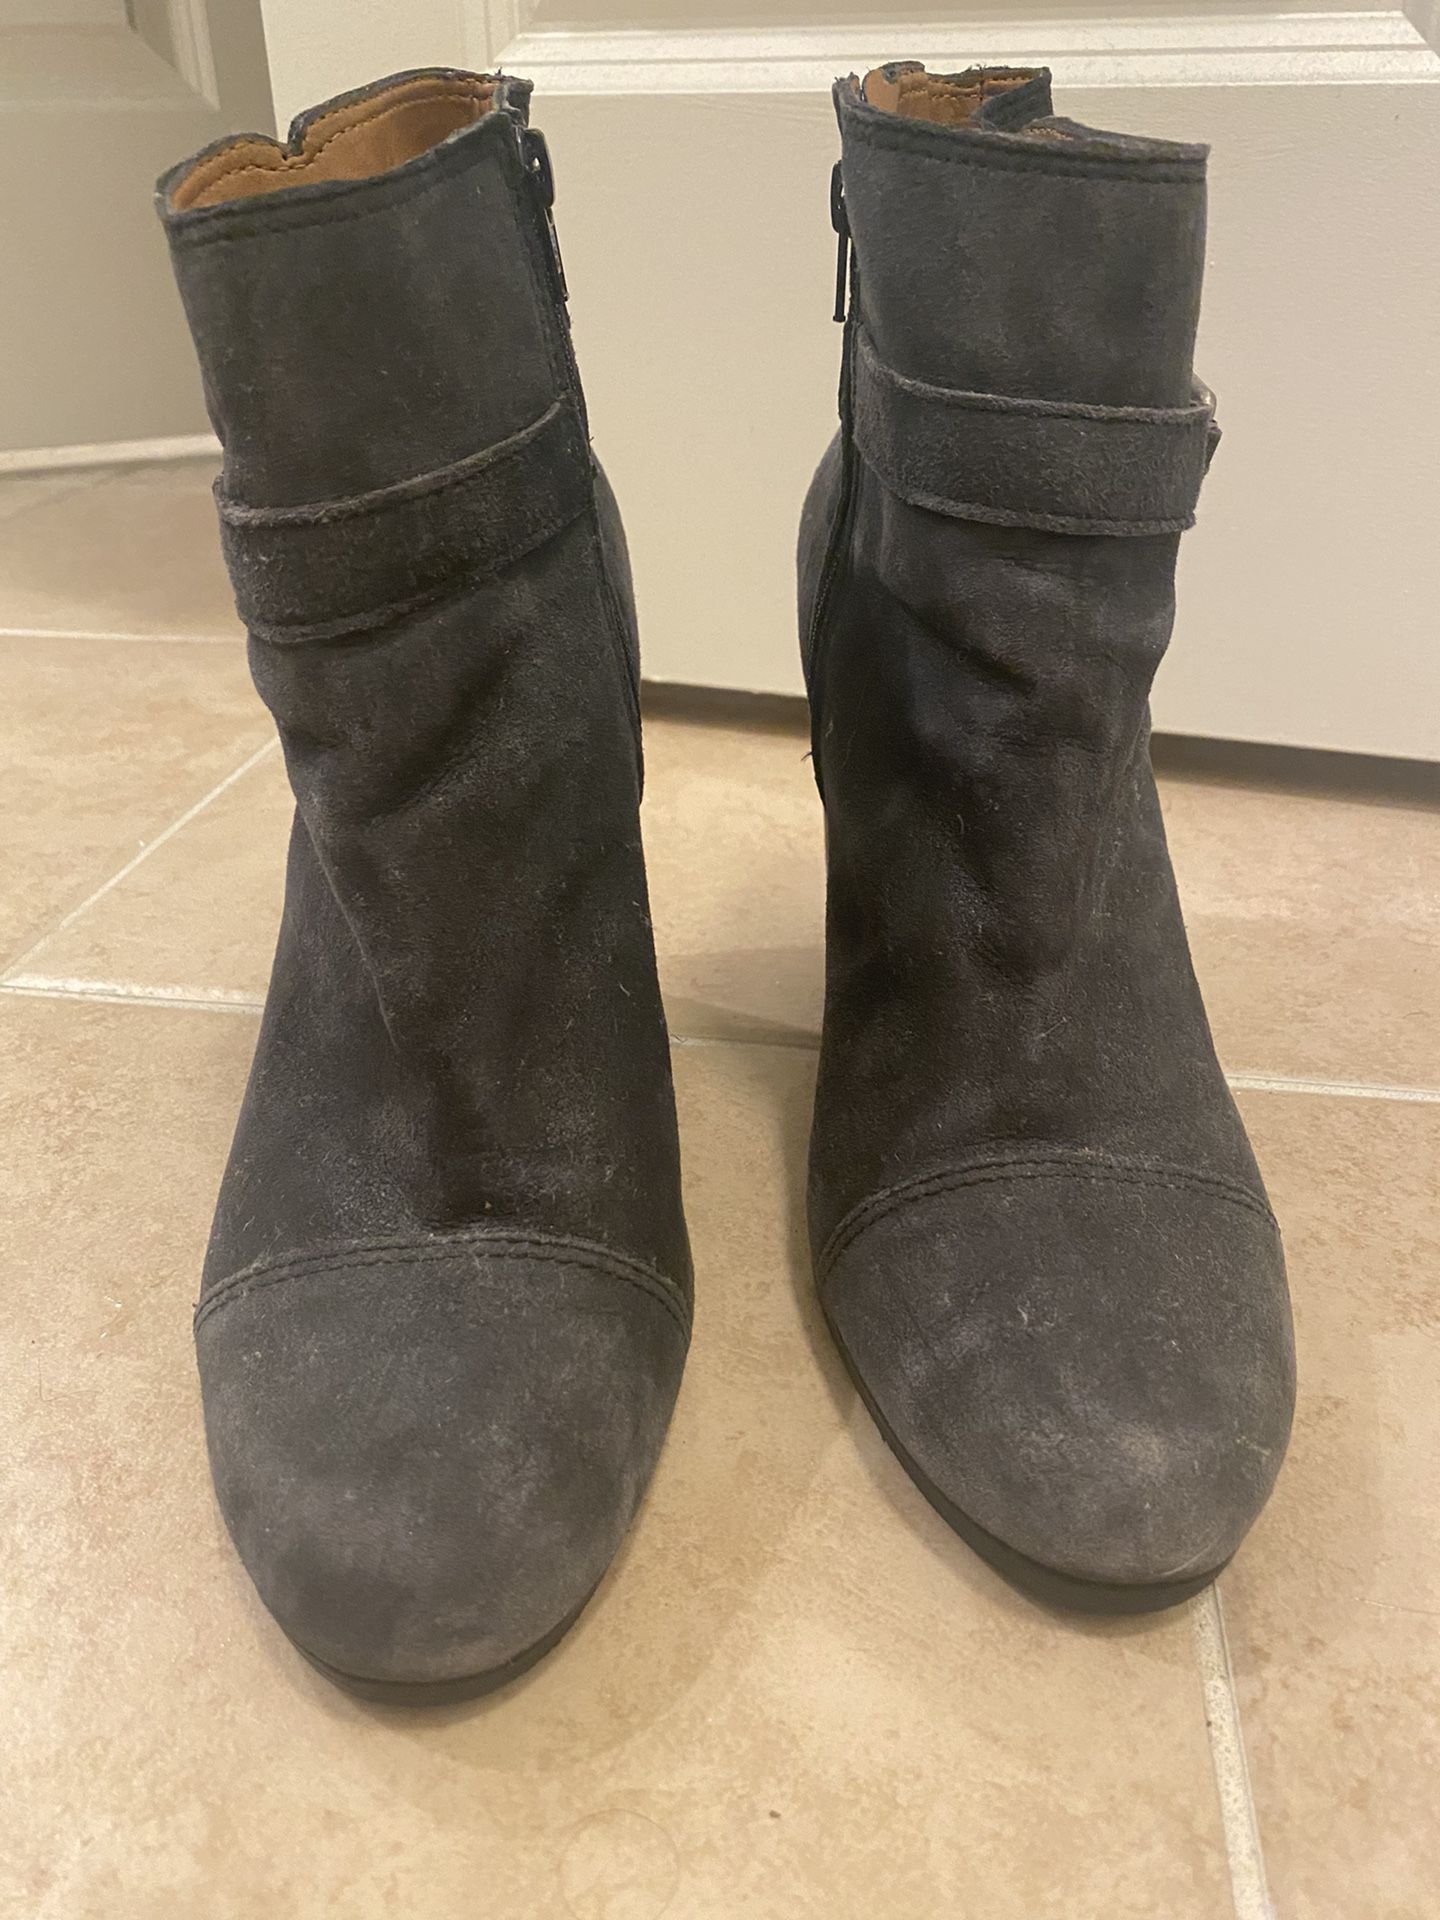 Lucky Brand Black Booties, Size 10